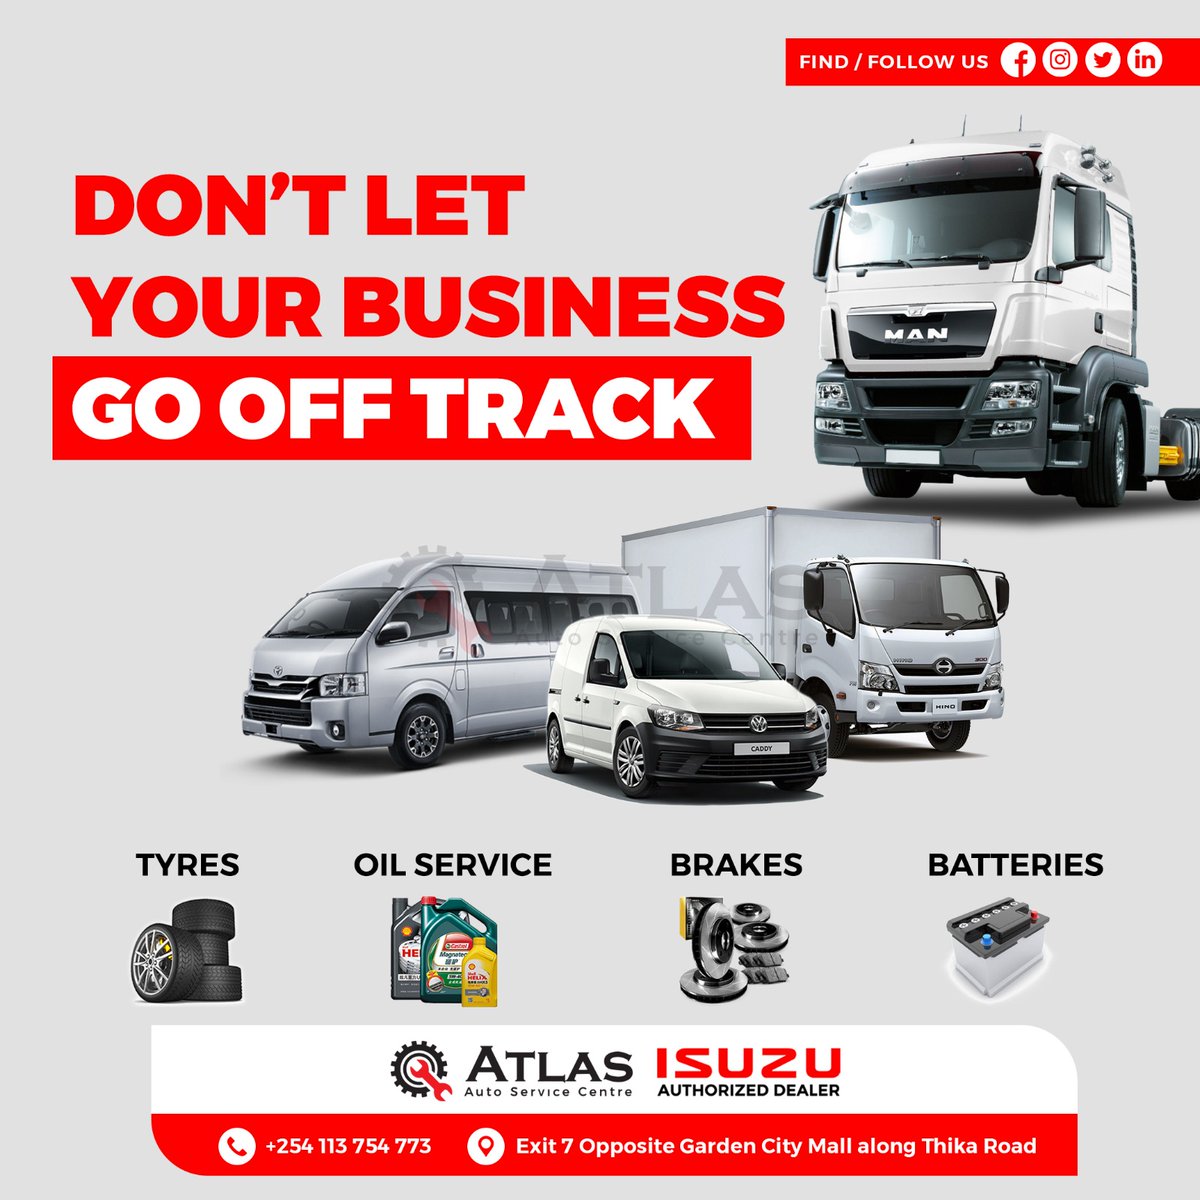 Don't let breakdowns derail your plans—trust @Atlasautocentre to keep your trucks running smoothly.With our expertise and dedication,we'll ensure your fleet stays on track, mile after mile.Let's keep your business moving forward! 🛣️✅#howcanwehelp #EidMubarak #TruckMaintenance